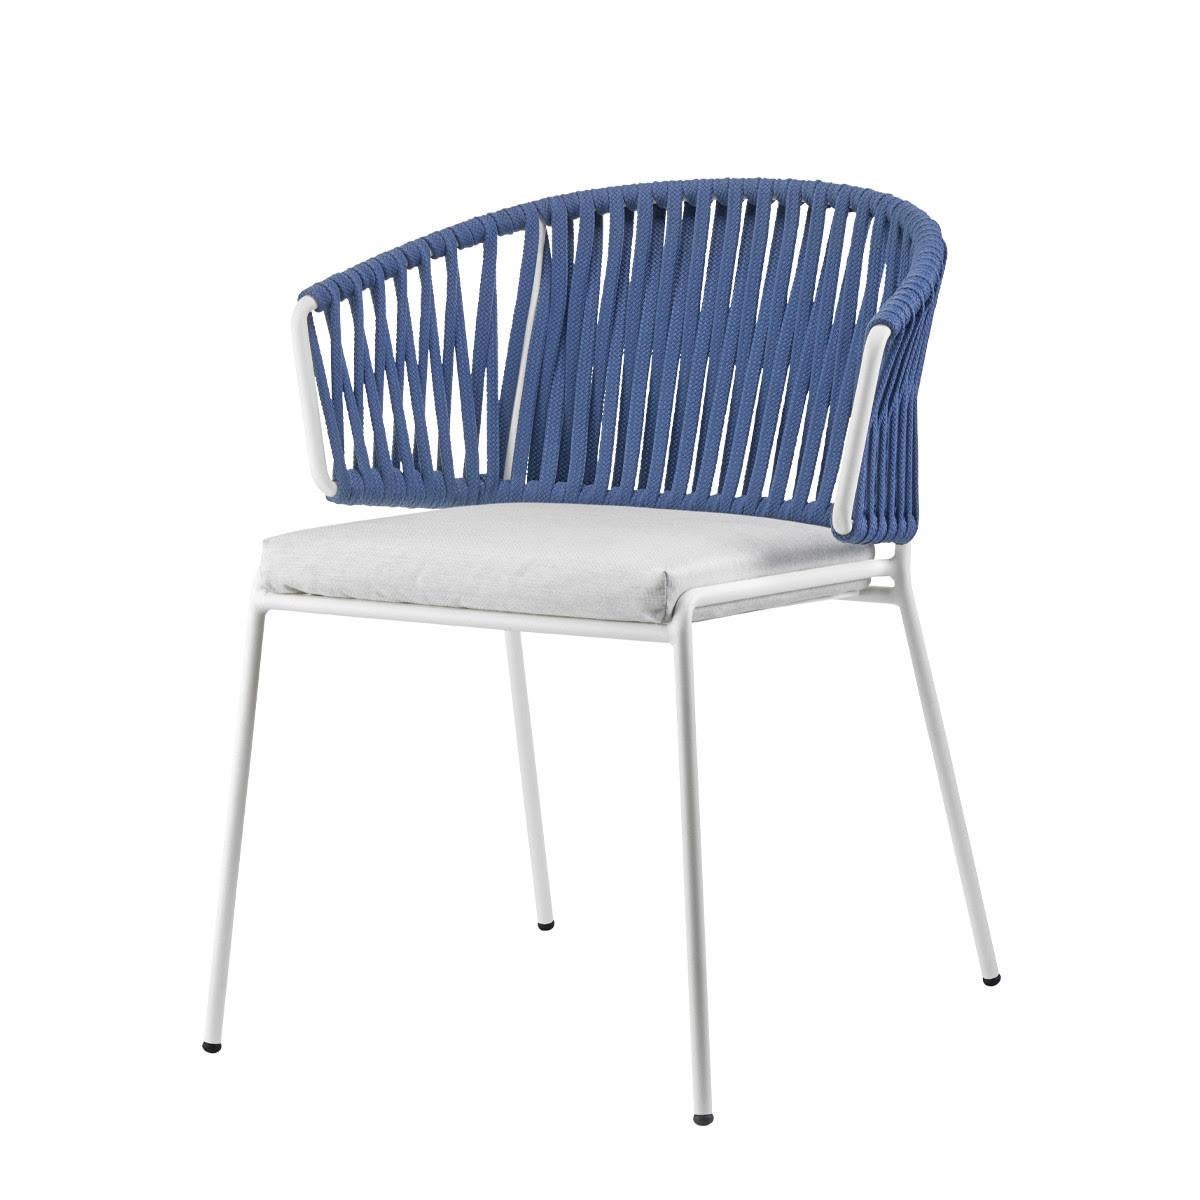 Pair of Blue Outdoor or Indoor Metal and Cord Armchairs, 21 century
Modern production armchair for outdoors or indoors. The structure is in metal and reinforced by the ropes on the back. This armchair has an innovative, modern and fresh design.
The